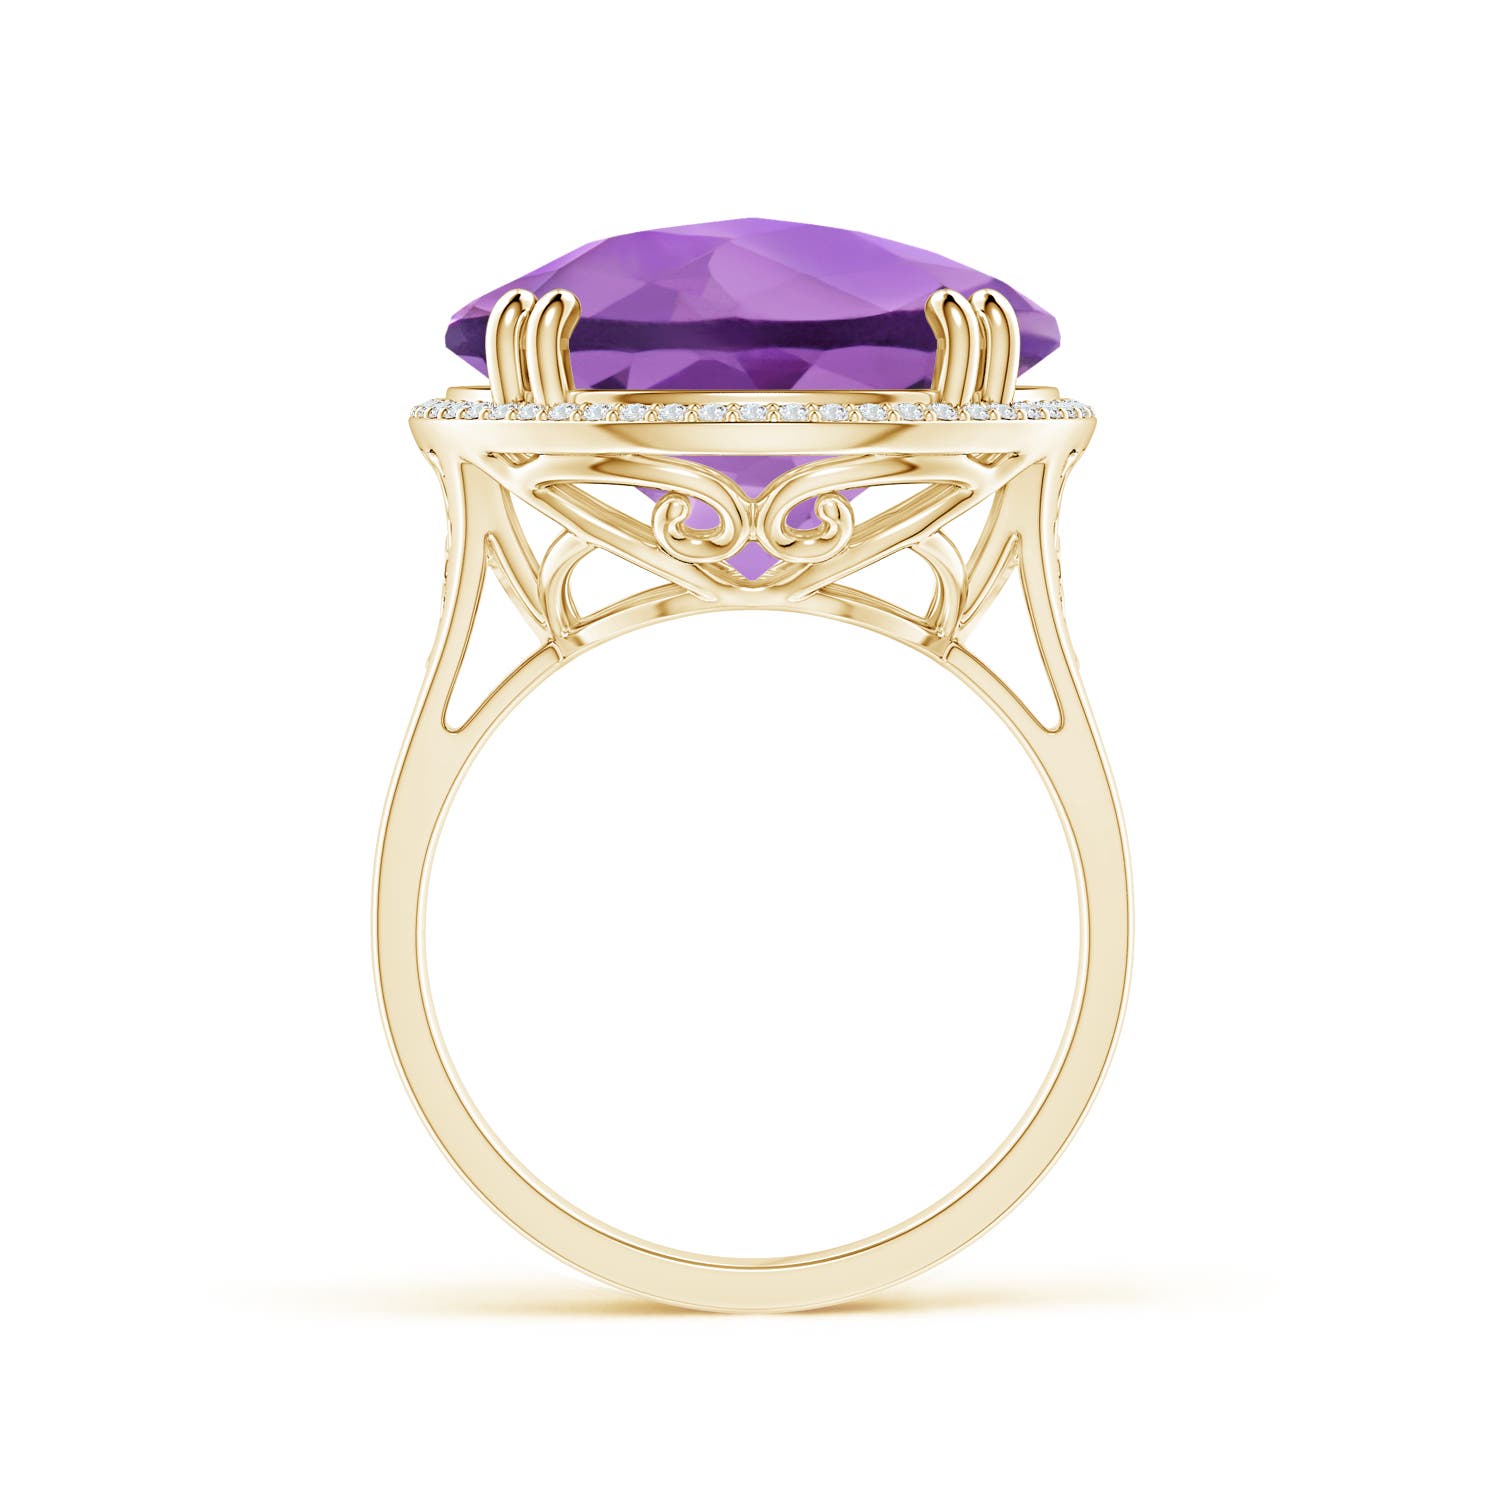 A - Amethyst / 15.18 CT / 14 KT Yellow Gold